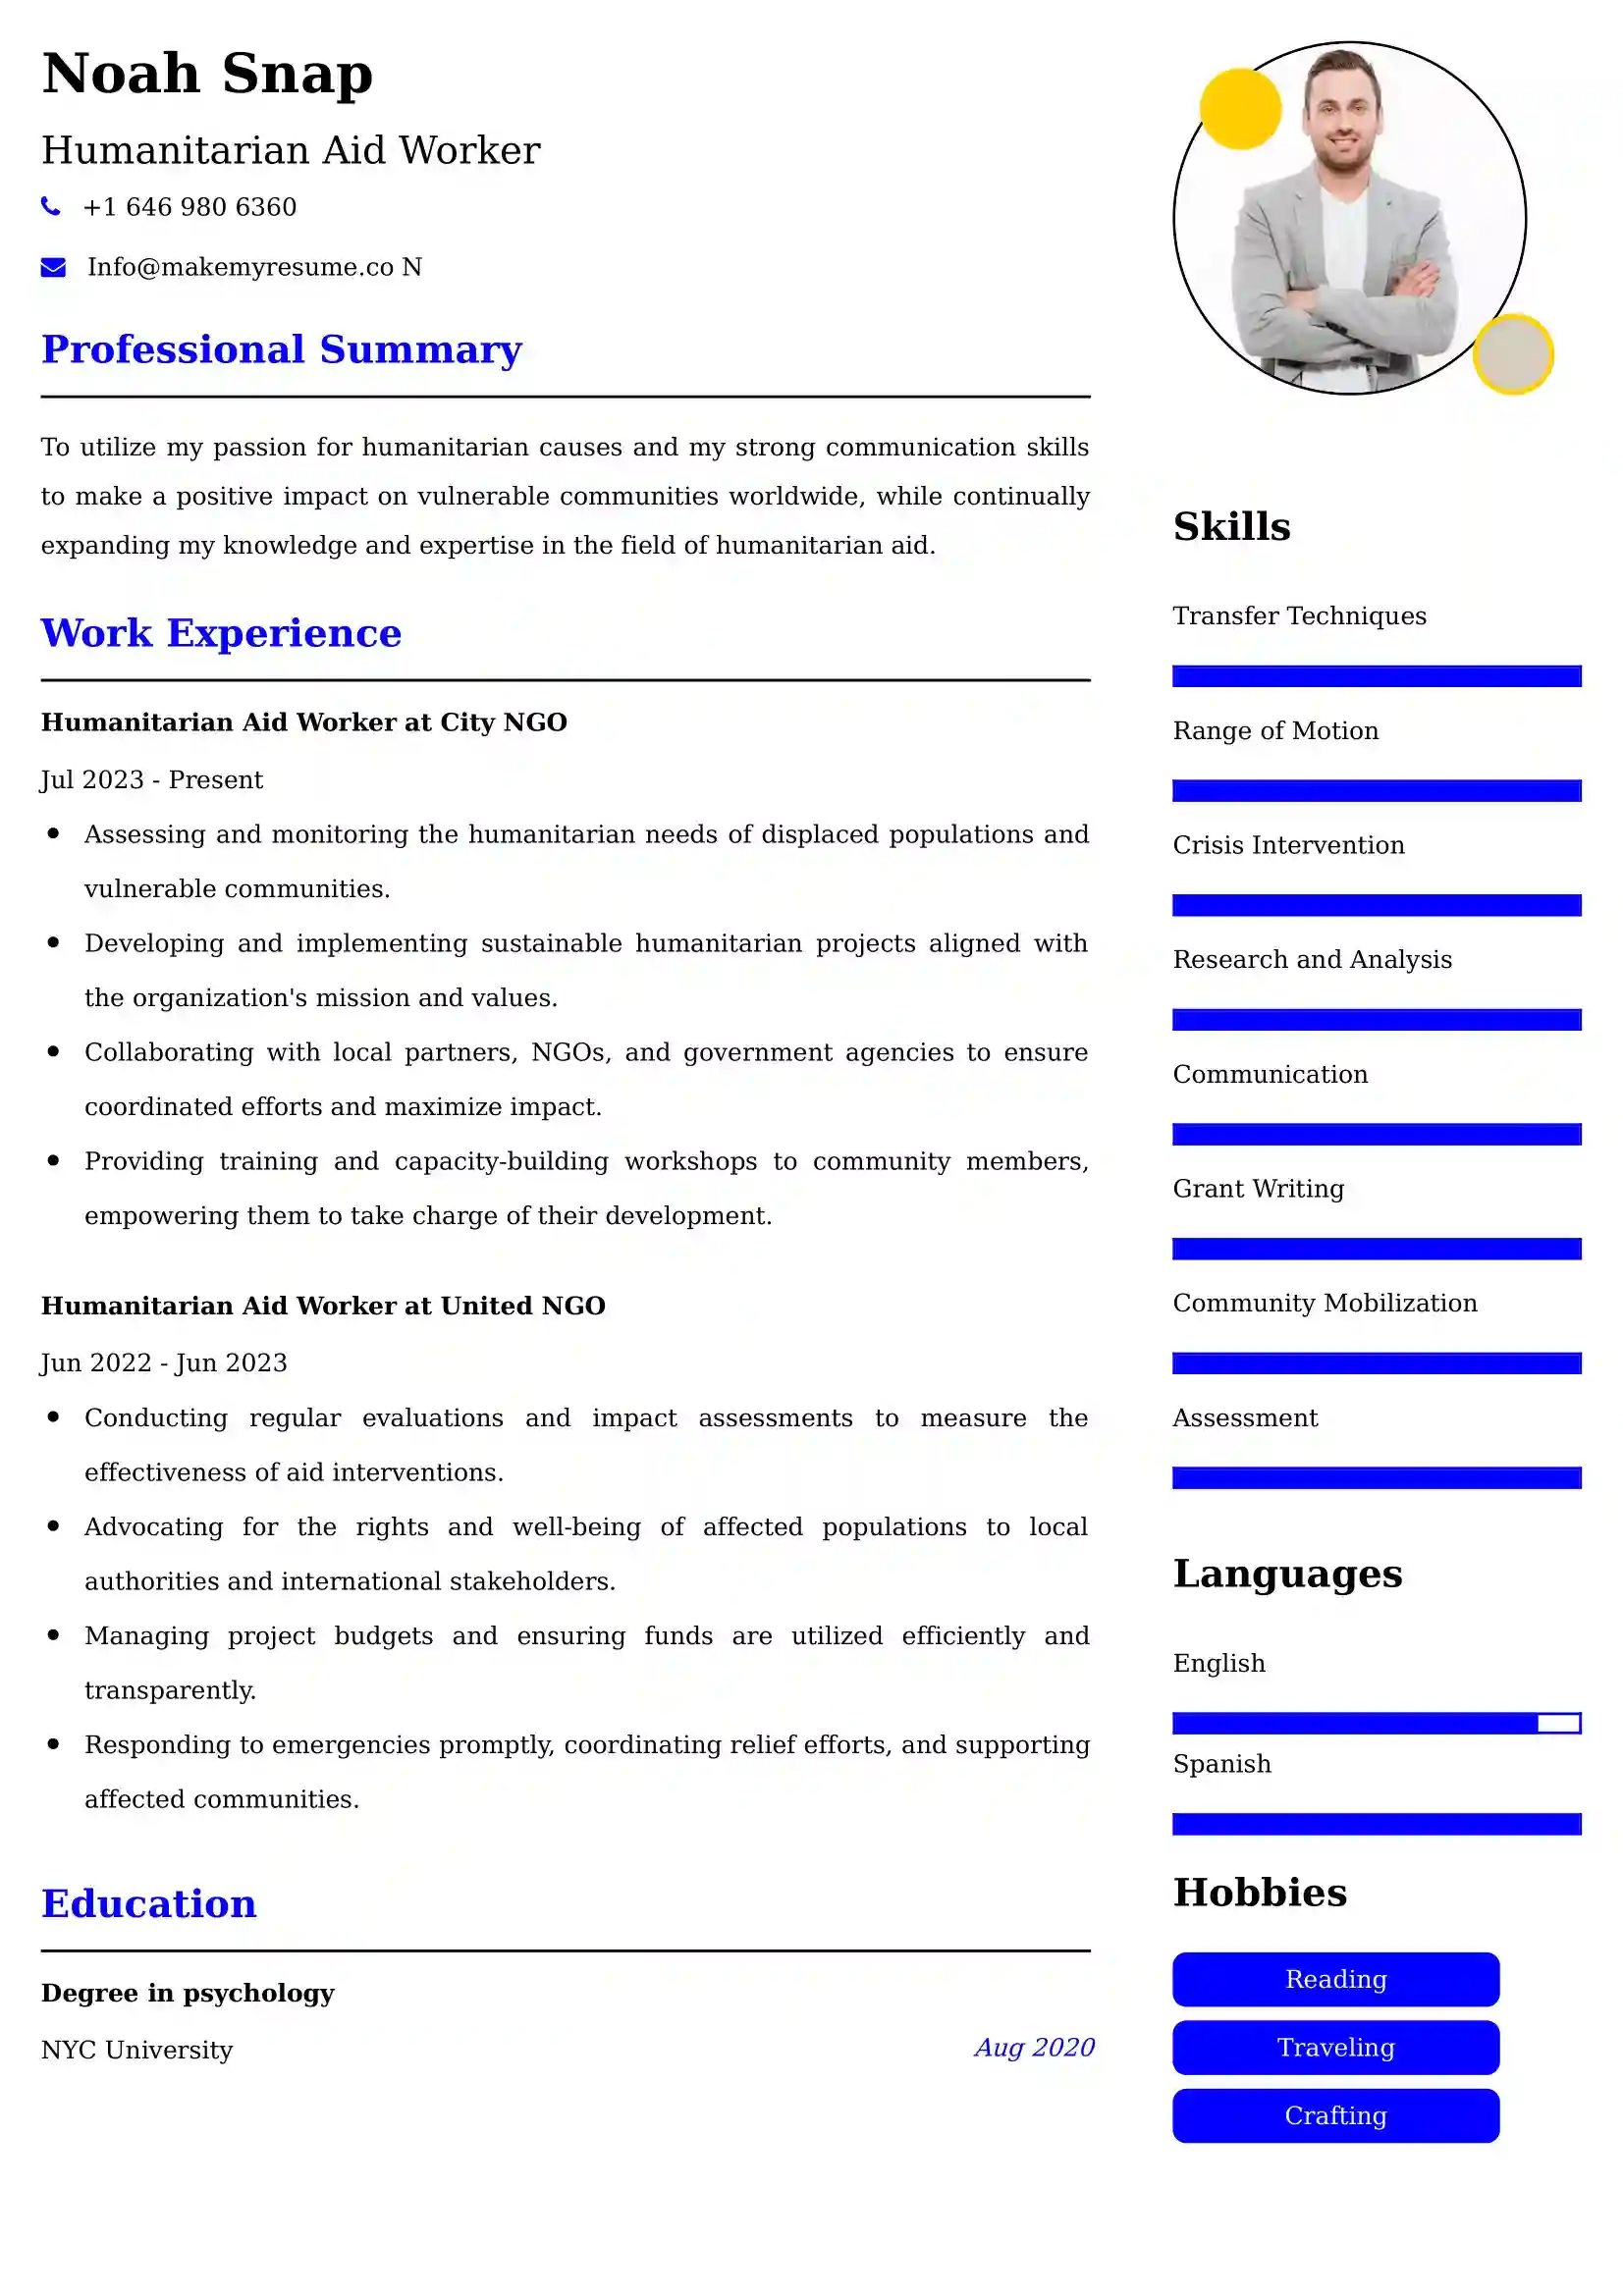 Best Humanitarian Aid Worker Resume Examples for UK